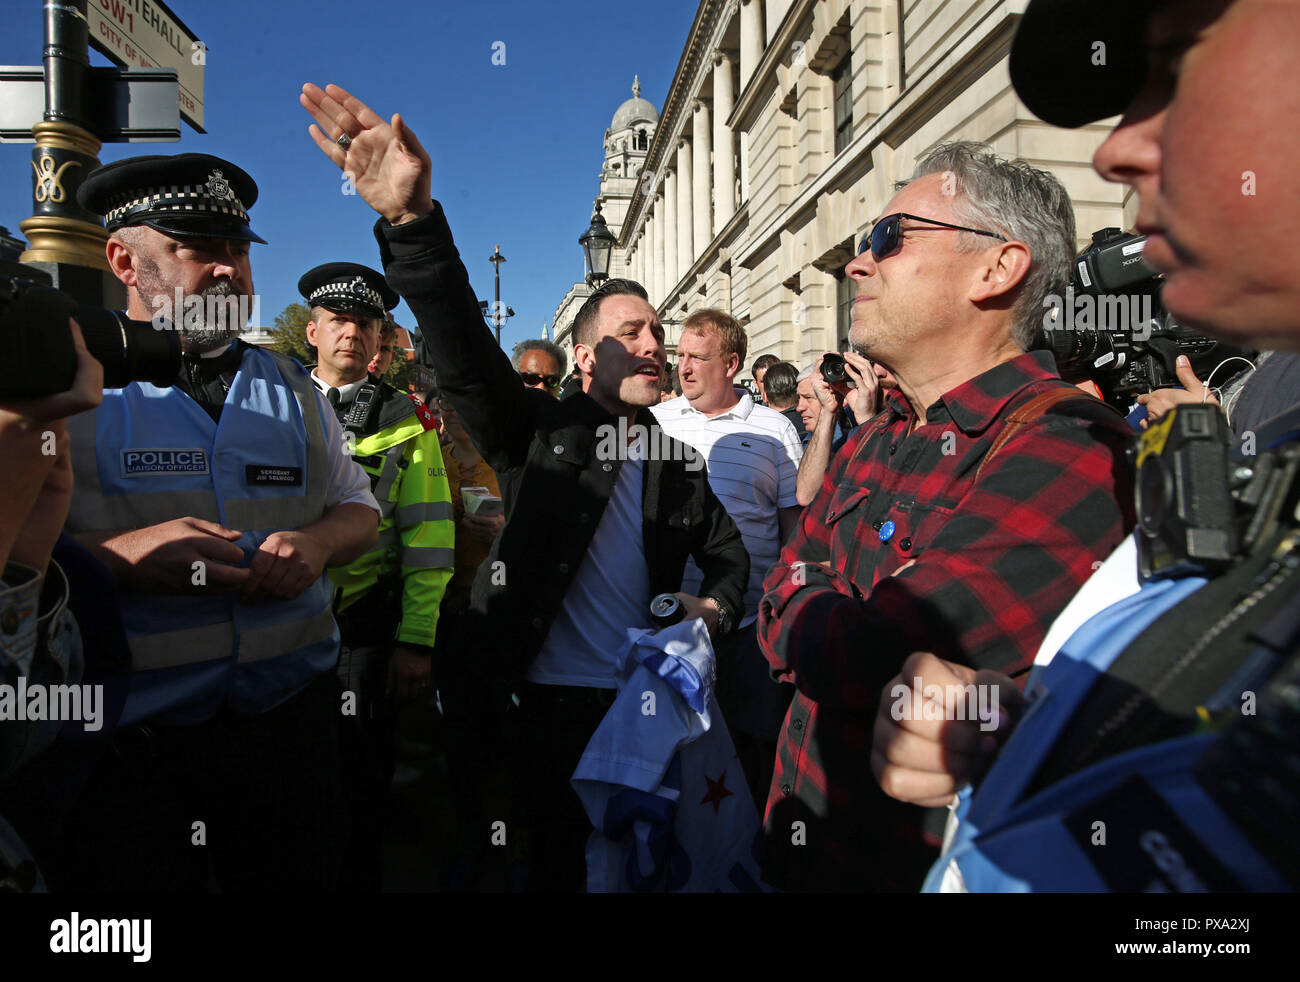 A man in favour of Brexit (centre) argues with people taking part in the People's Vote March for the Future in London, a march and rally in support of a second EU referendum. Stock Photo